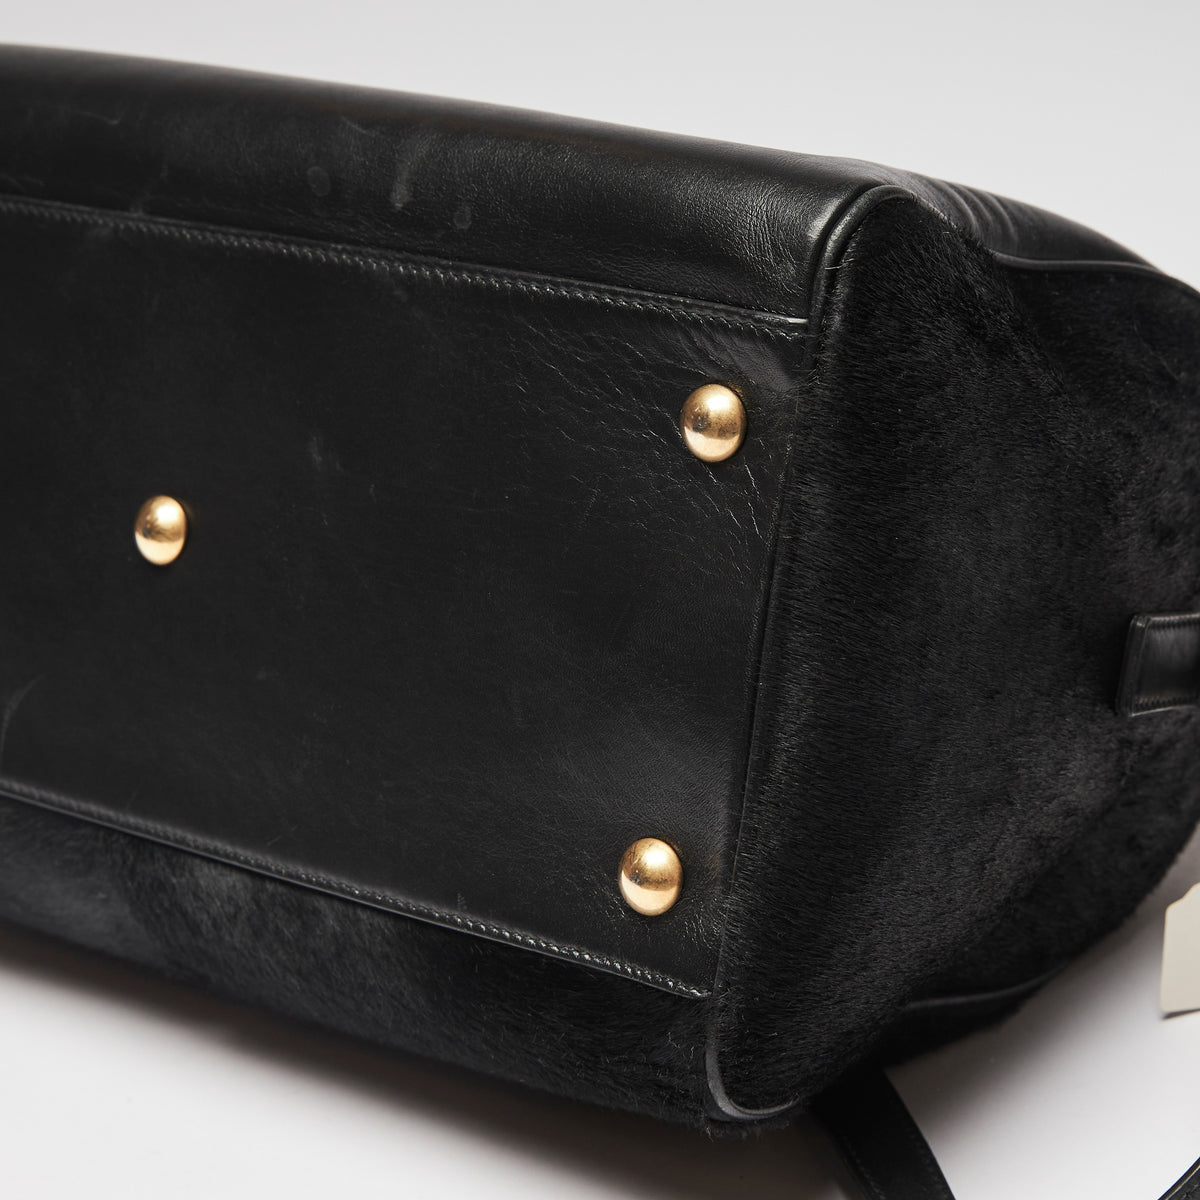 Pre-Loved Black Leather and Pony Hair Duffle Bag with Removable Shoulder Strap.  (corner)